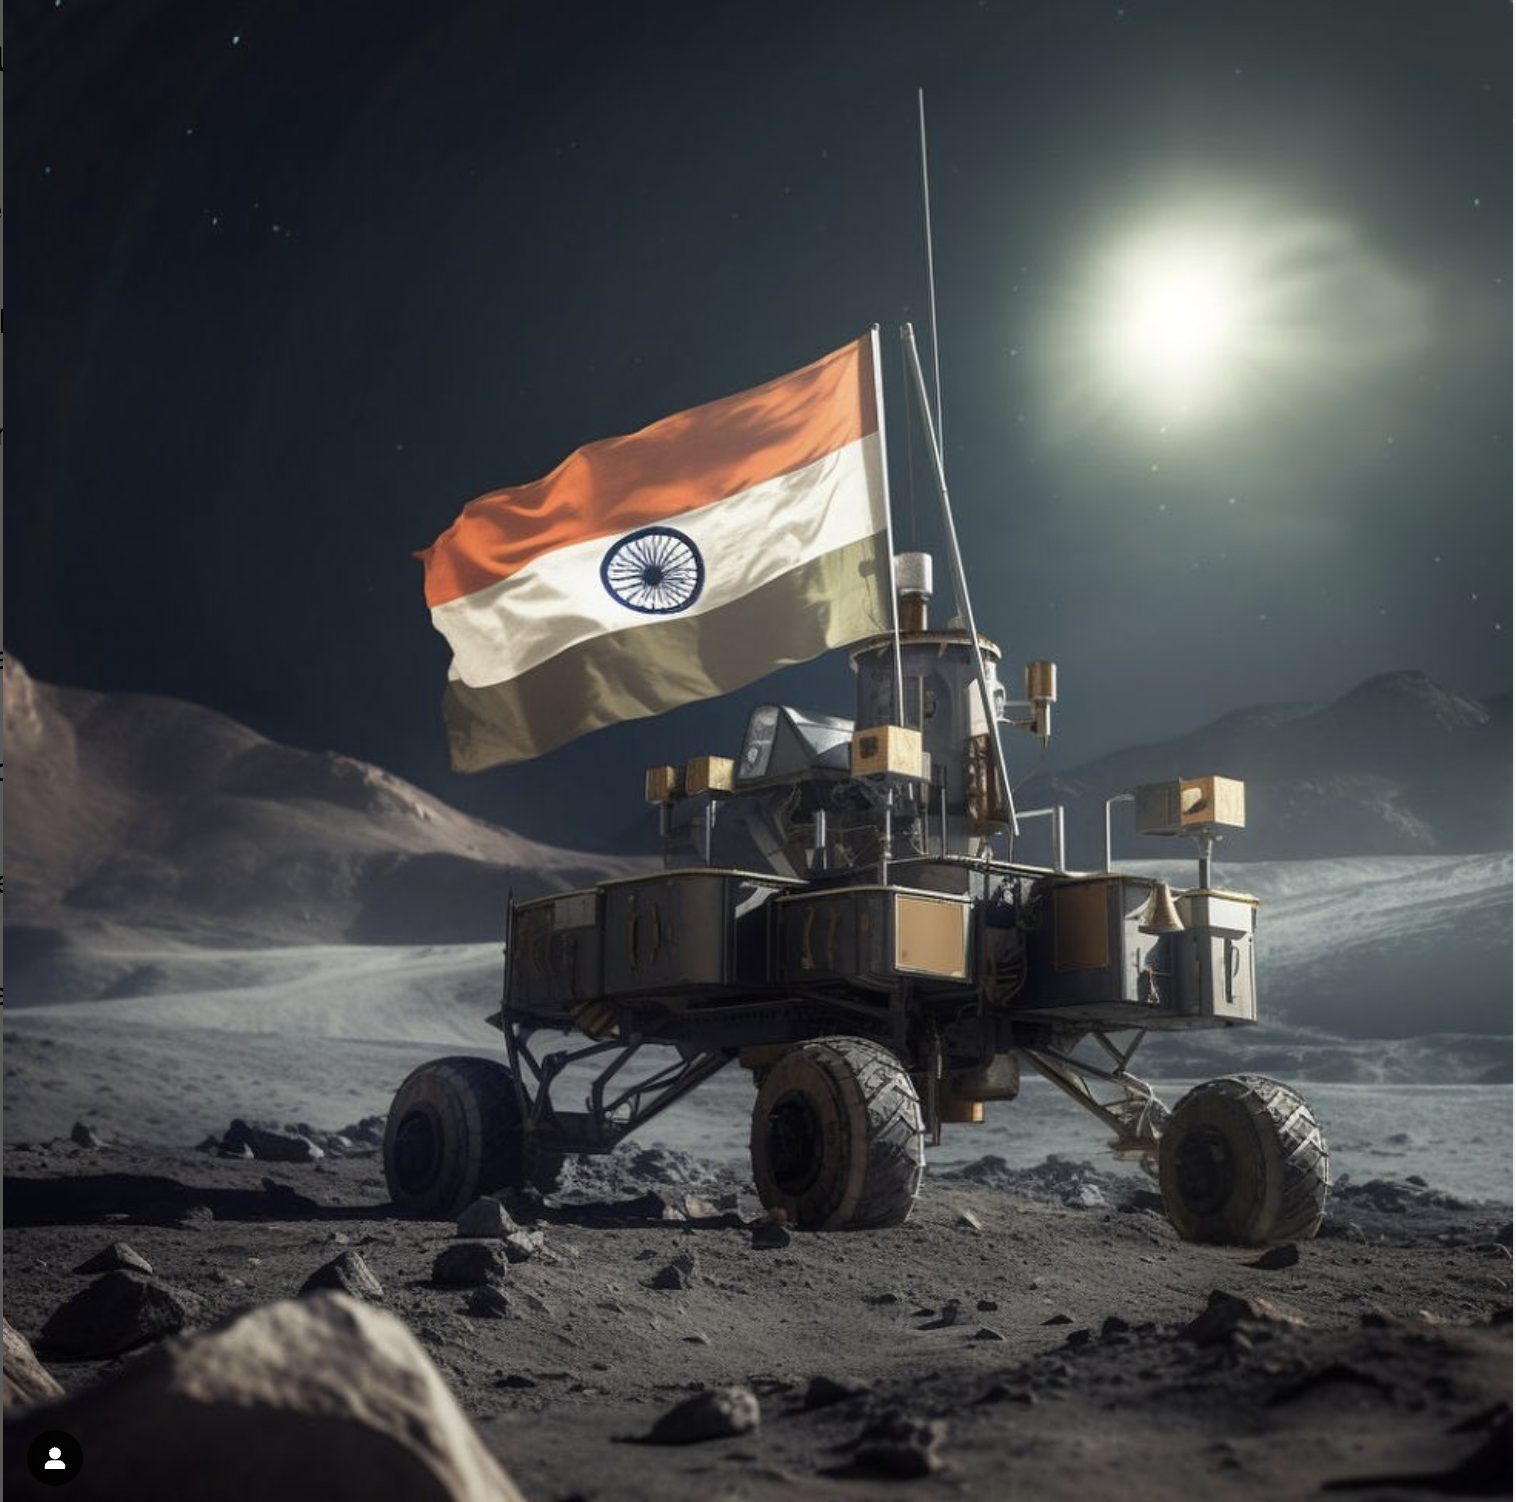  India Makes History: Chandrayaan-3 Successfully Lands Rover on Moon’s South Pole, Pioneering a New Era in Lunar Exploration